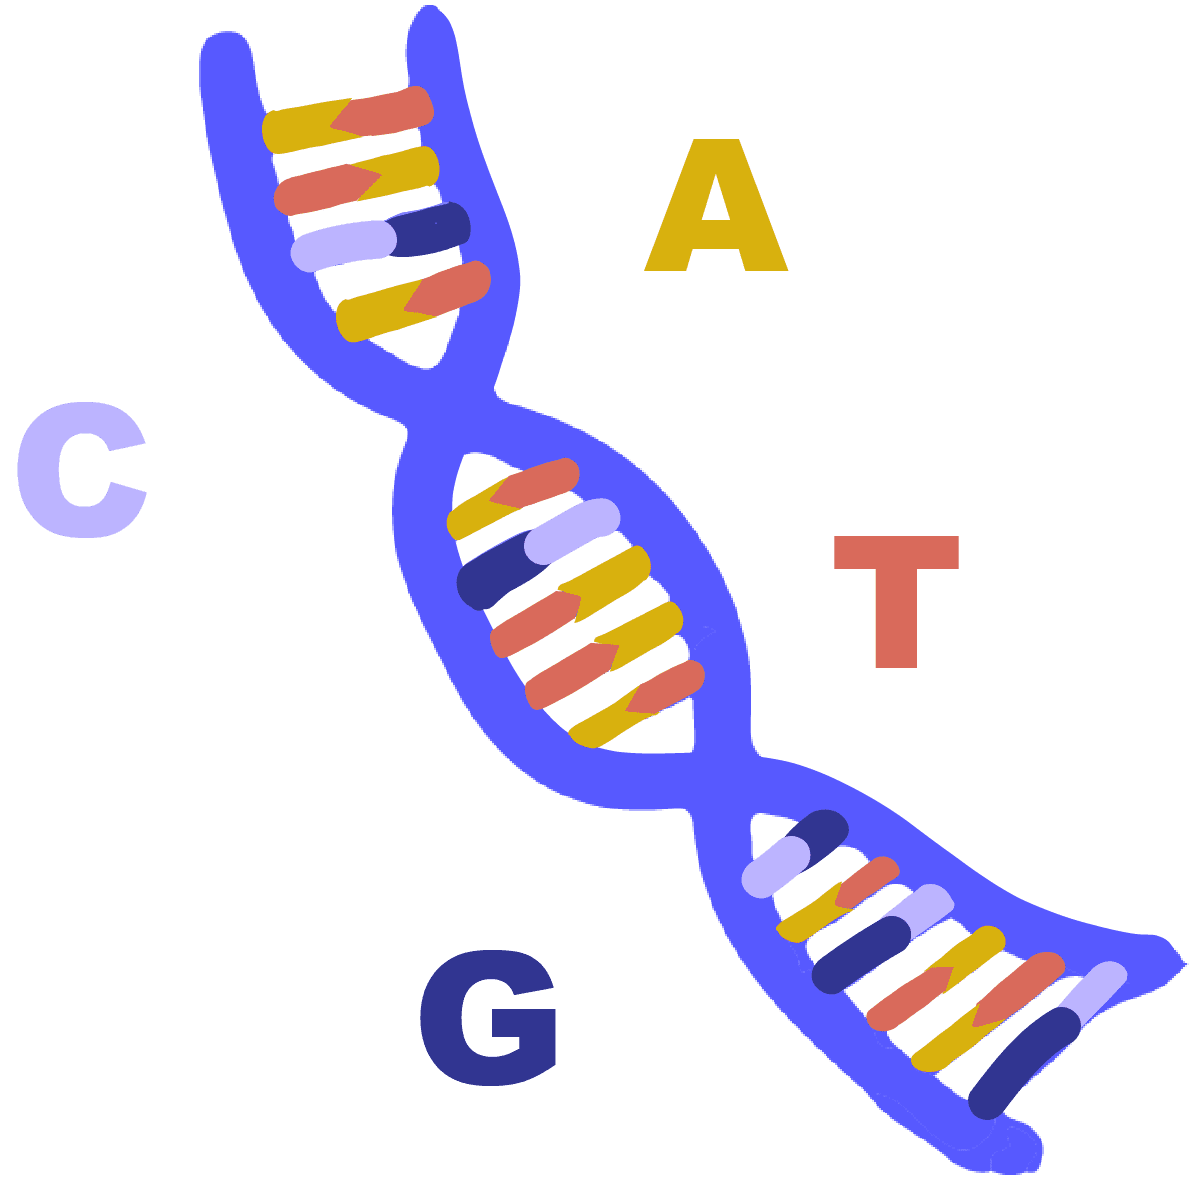 Image of blue DNA helix with base pairs Adenine, Thymine, Cytosine and Guanine